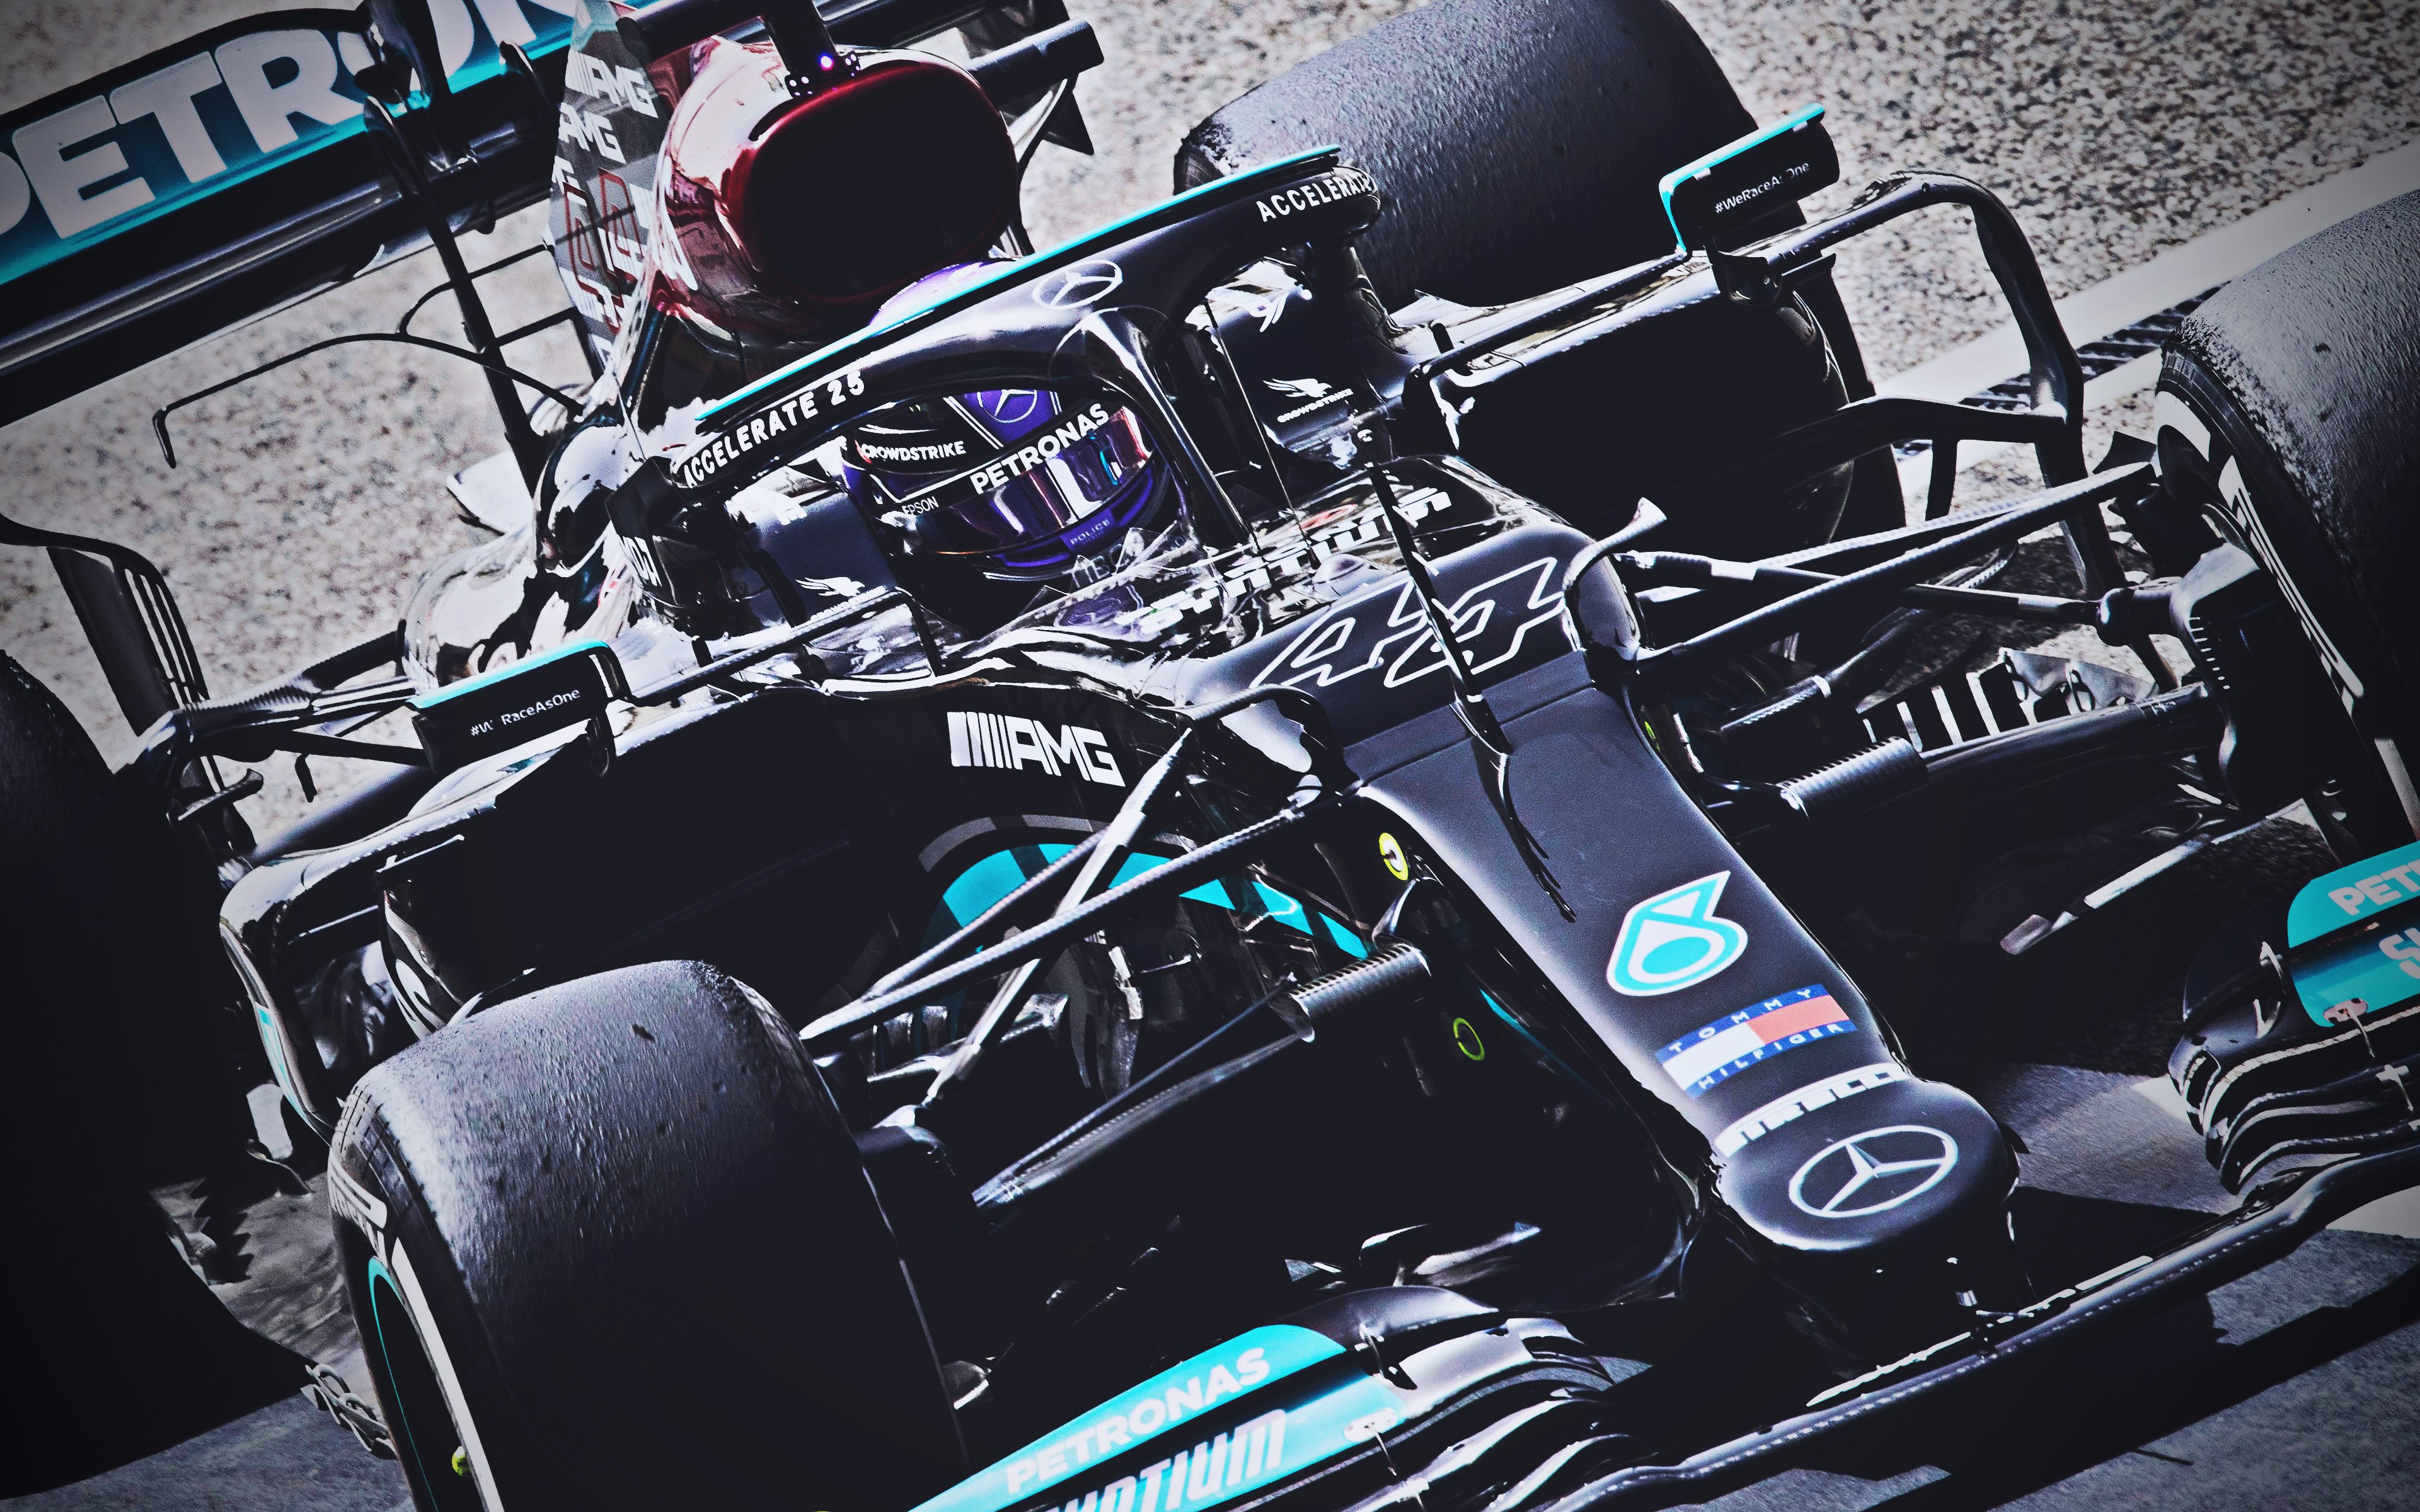 Download Wallpaper 4k, Lewis Hamilton, Close Up, Mercedes AMG F1 W Mercedes AMG Petronas Formula One Team, British Racing Drivers, Formula F1 HDR, Mercedes AMG F1 W12 On Track For Desktop With Resolution